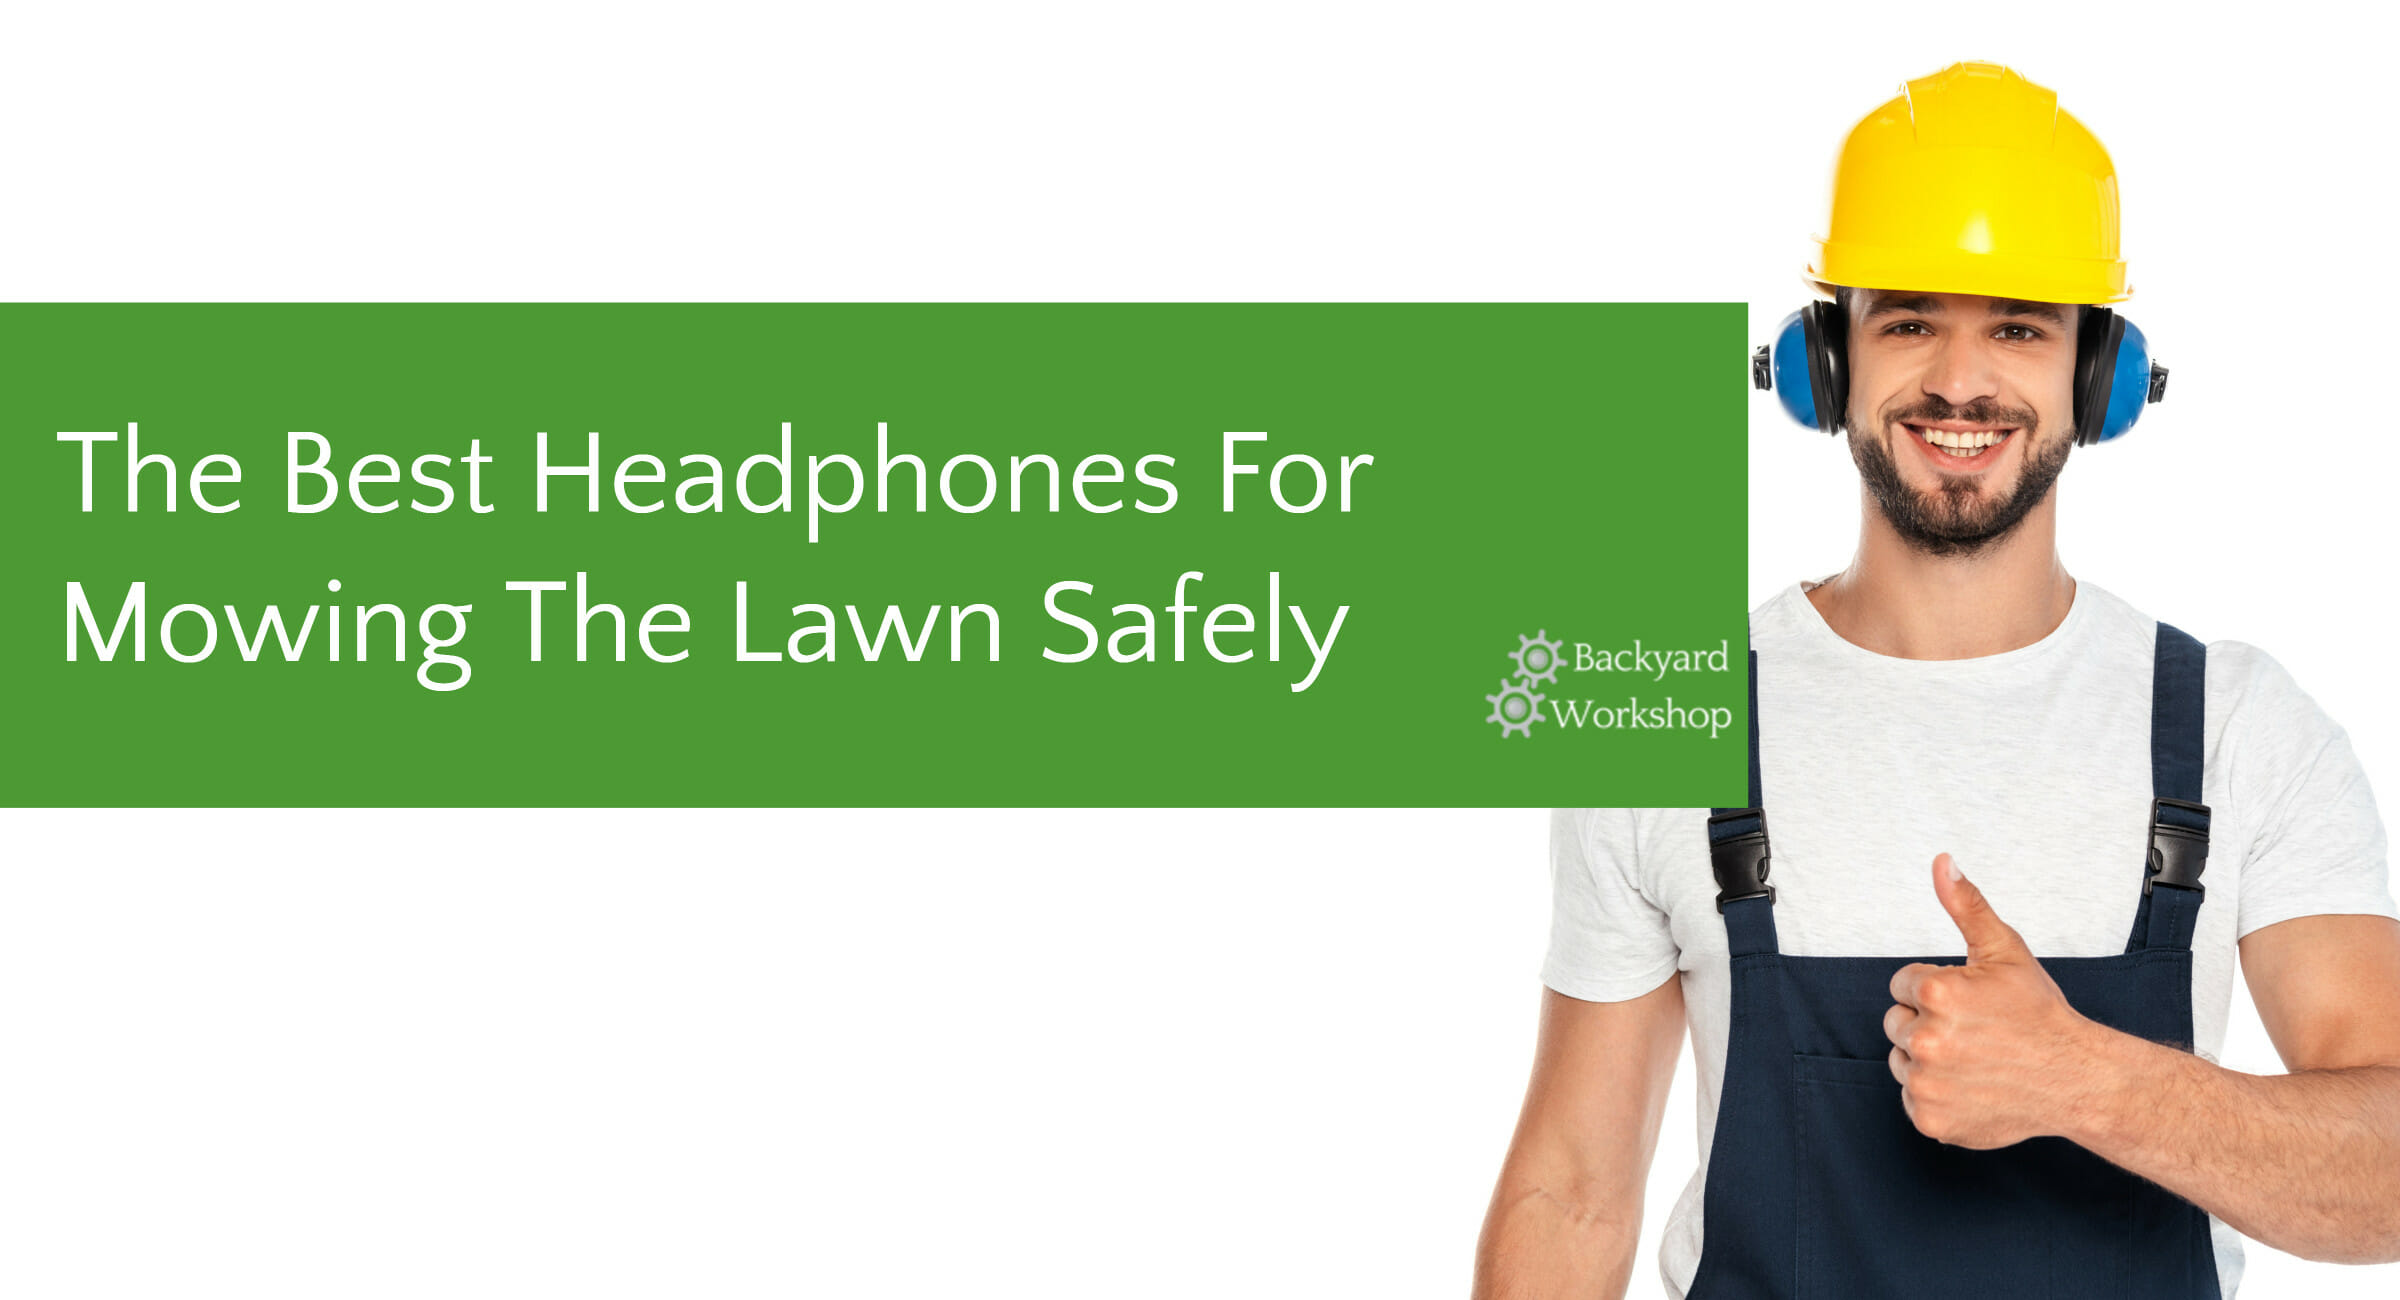 Lawn mowing headphones are a must. They can be in earmuff or earbud stle; true wireless headphones or more headset ear protection. I like a wireless ear defender with bluetooth 5 but others like having am radio available to listen to. Some have stereo sound or even a micro sd port. Industrial safety standards are what is important when using these noise reduction headphones.